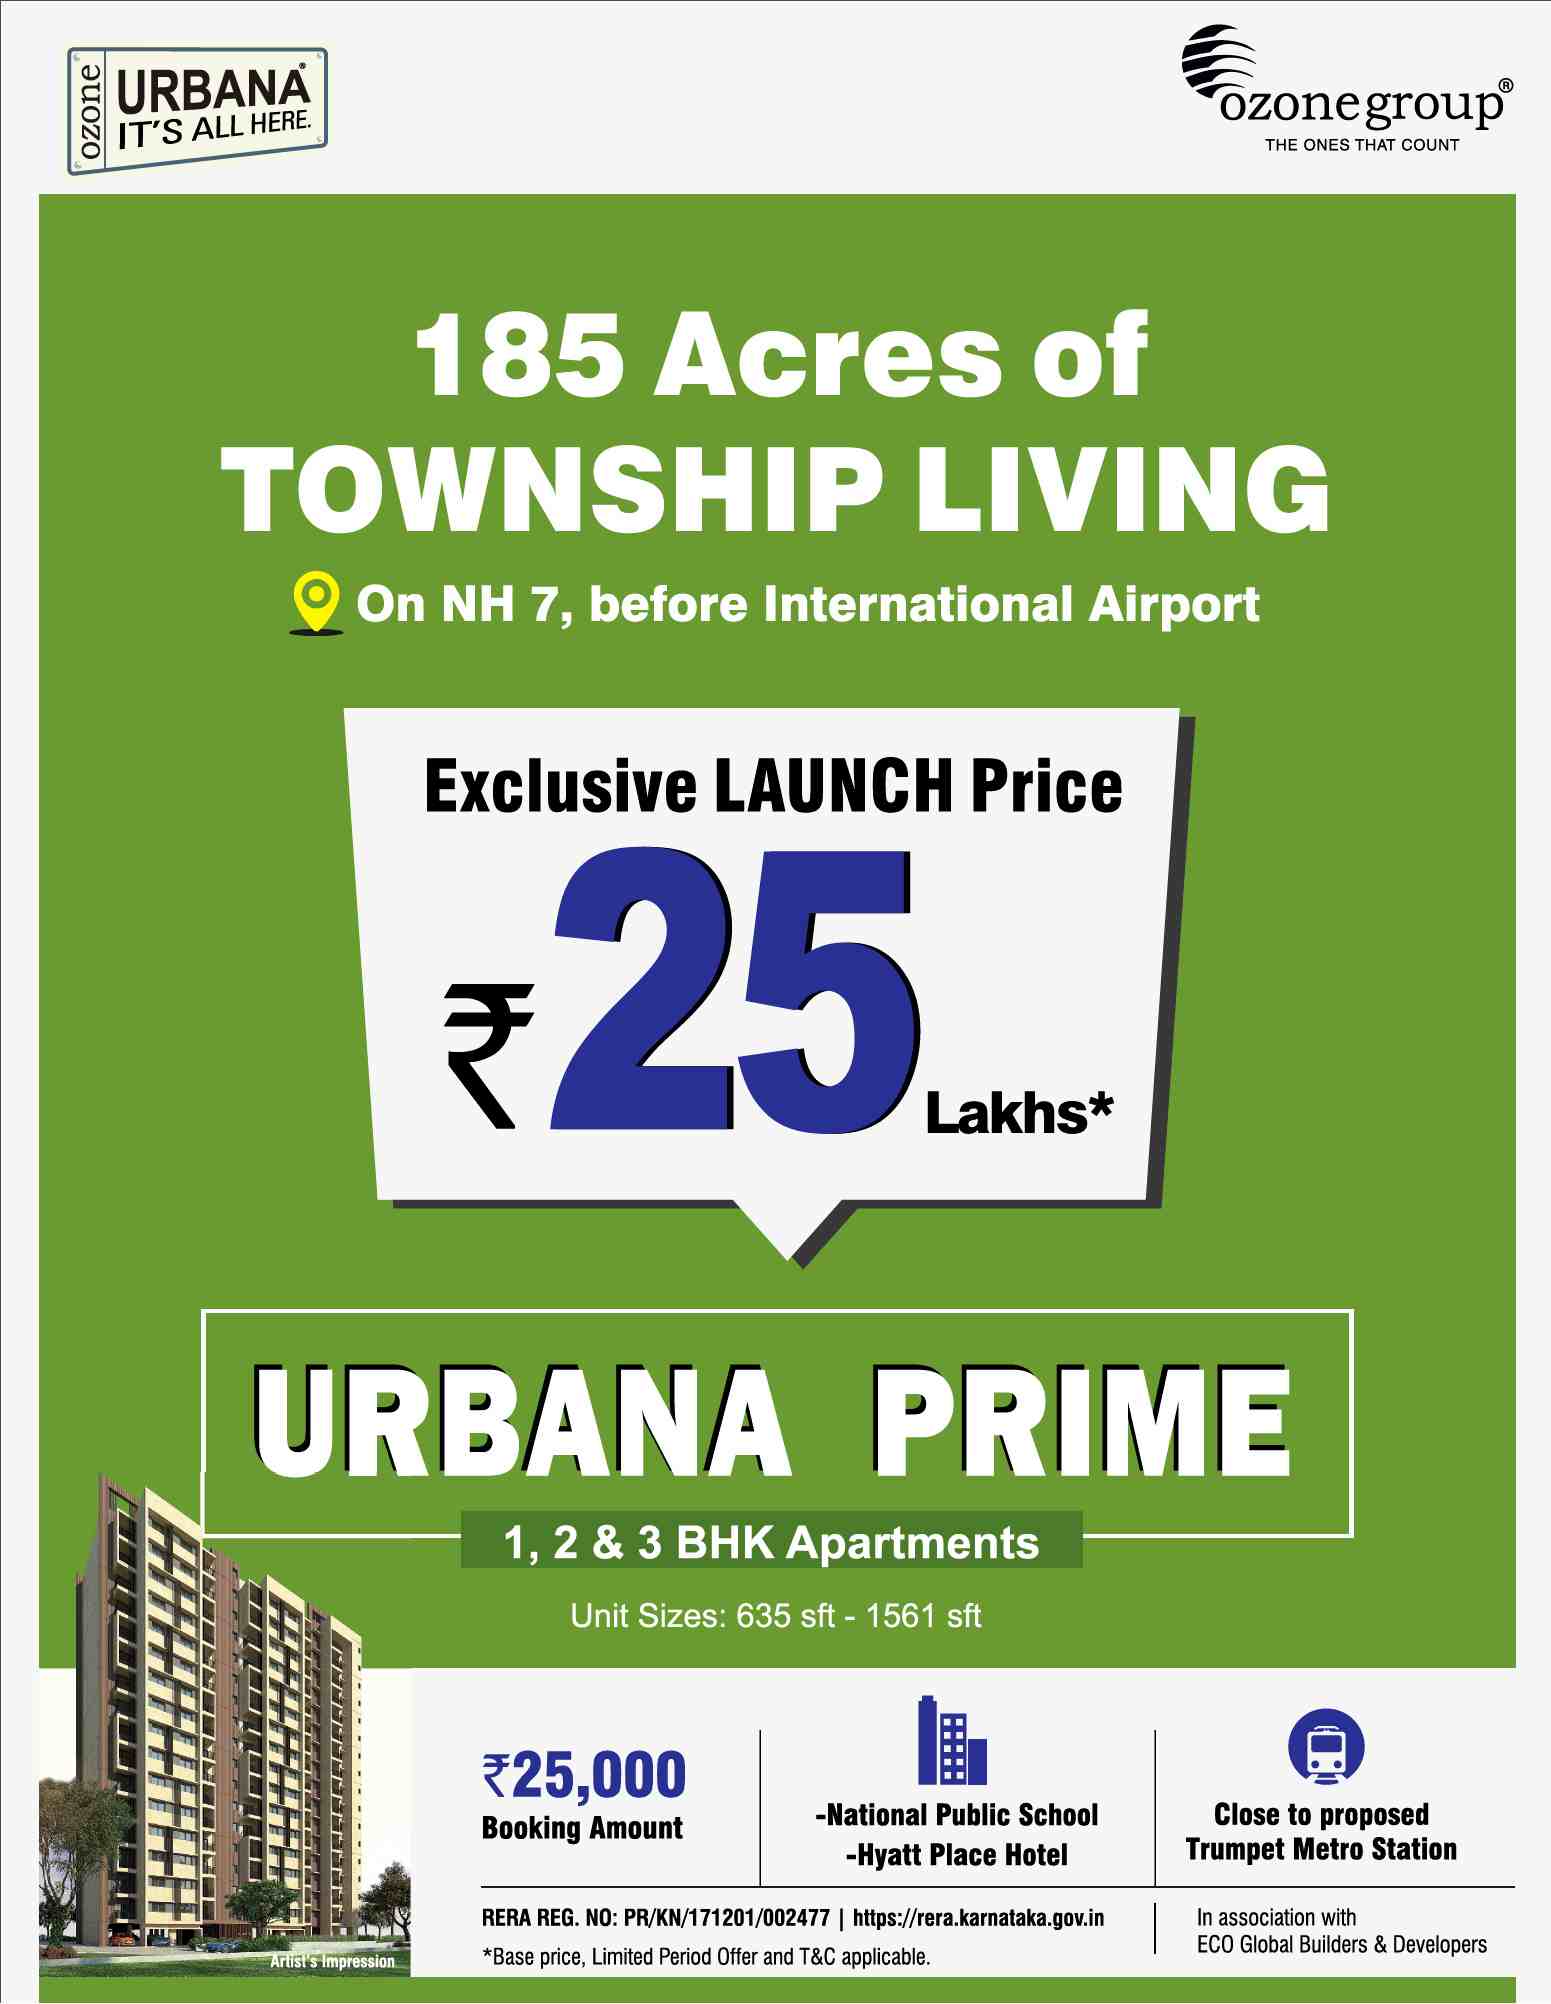 Pay Rs. 25,000 & book your home at Ozone Urbana Prime in Bangalore Update